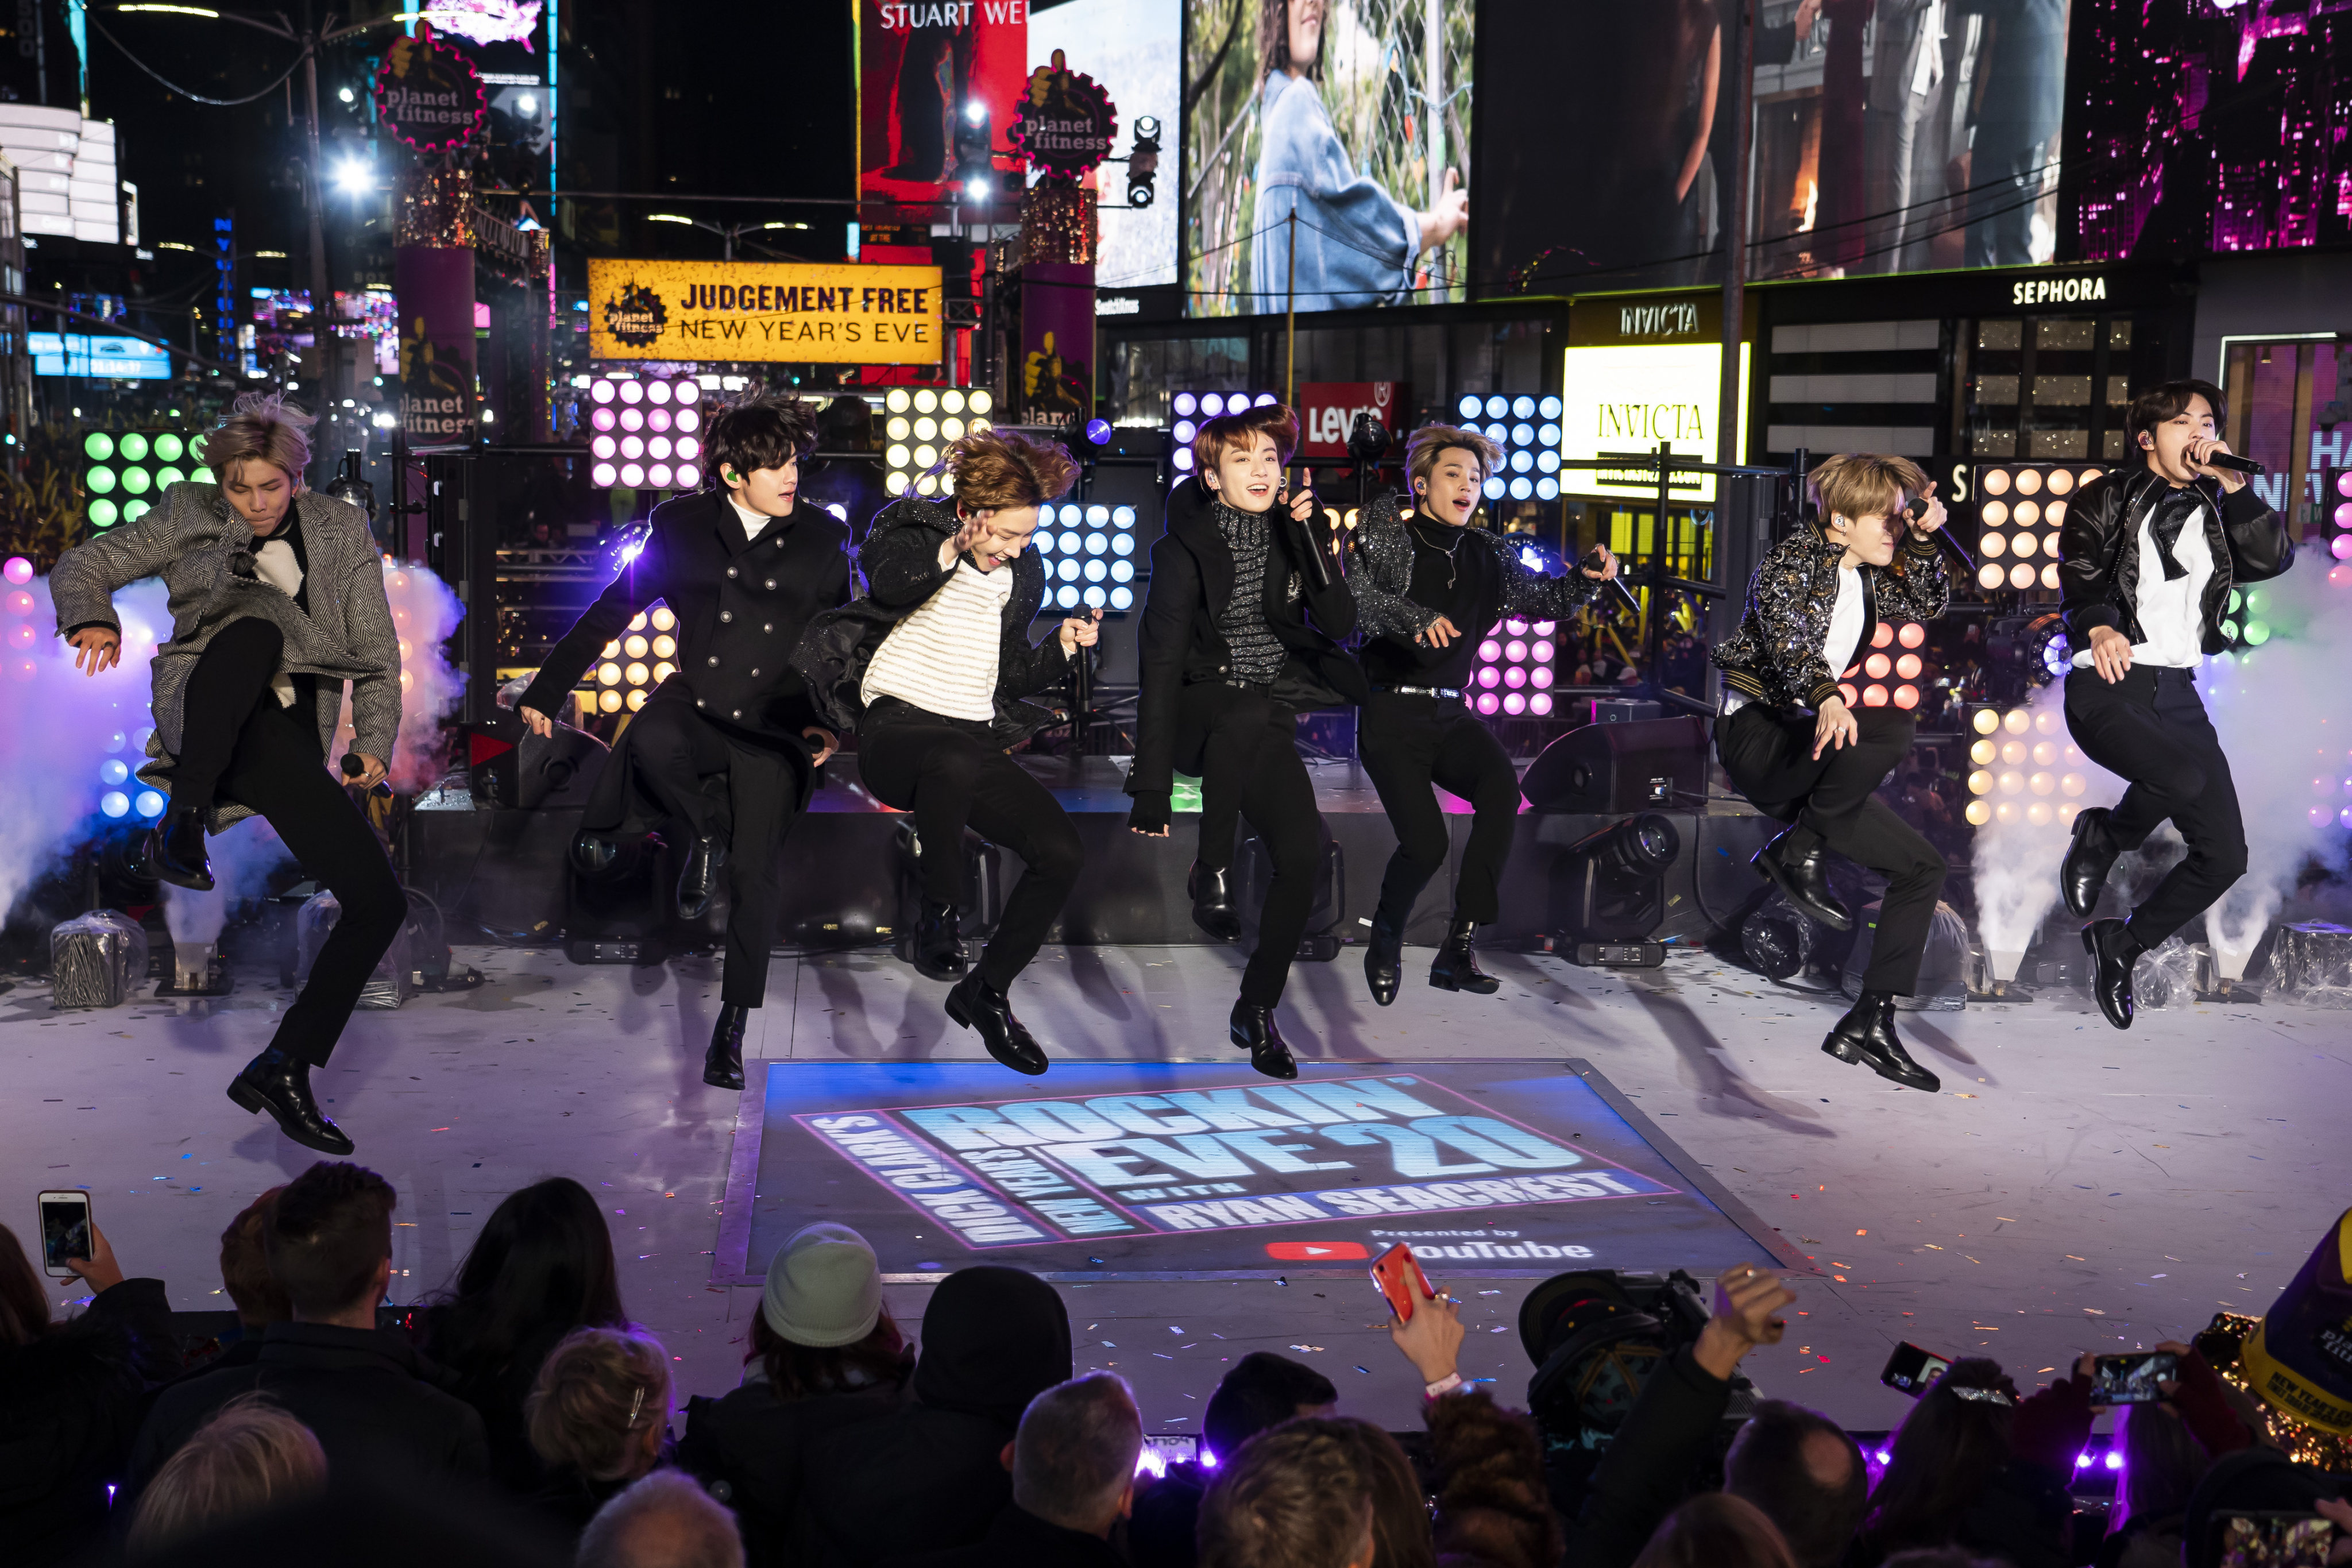 BTS stars perform at the Times Square in New York. File photo: Invision/AP